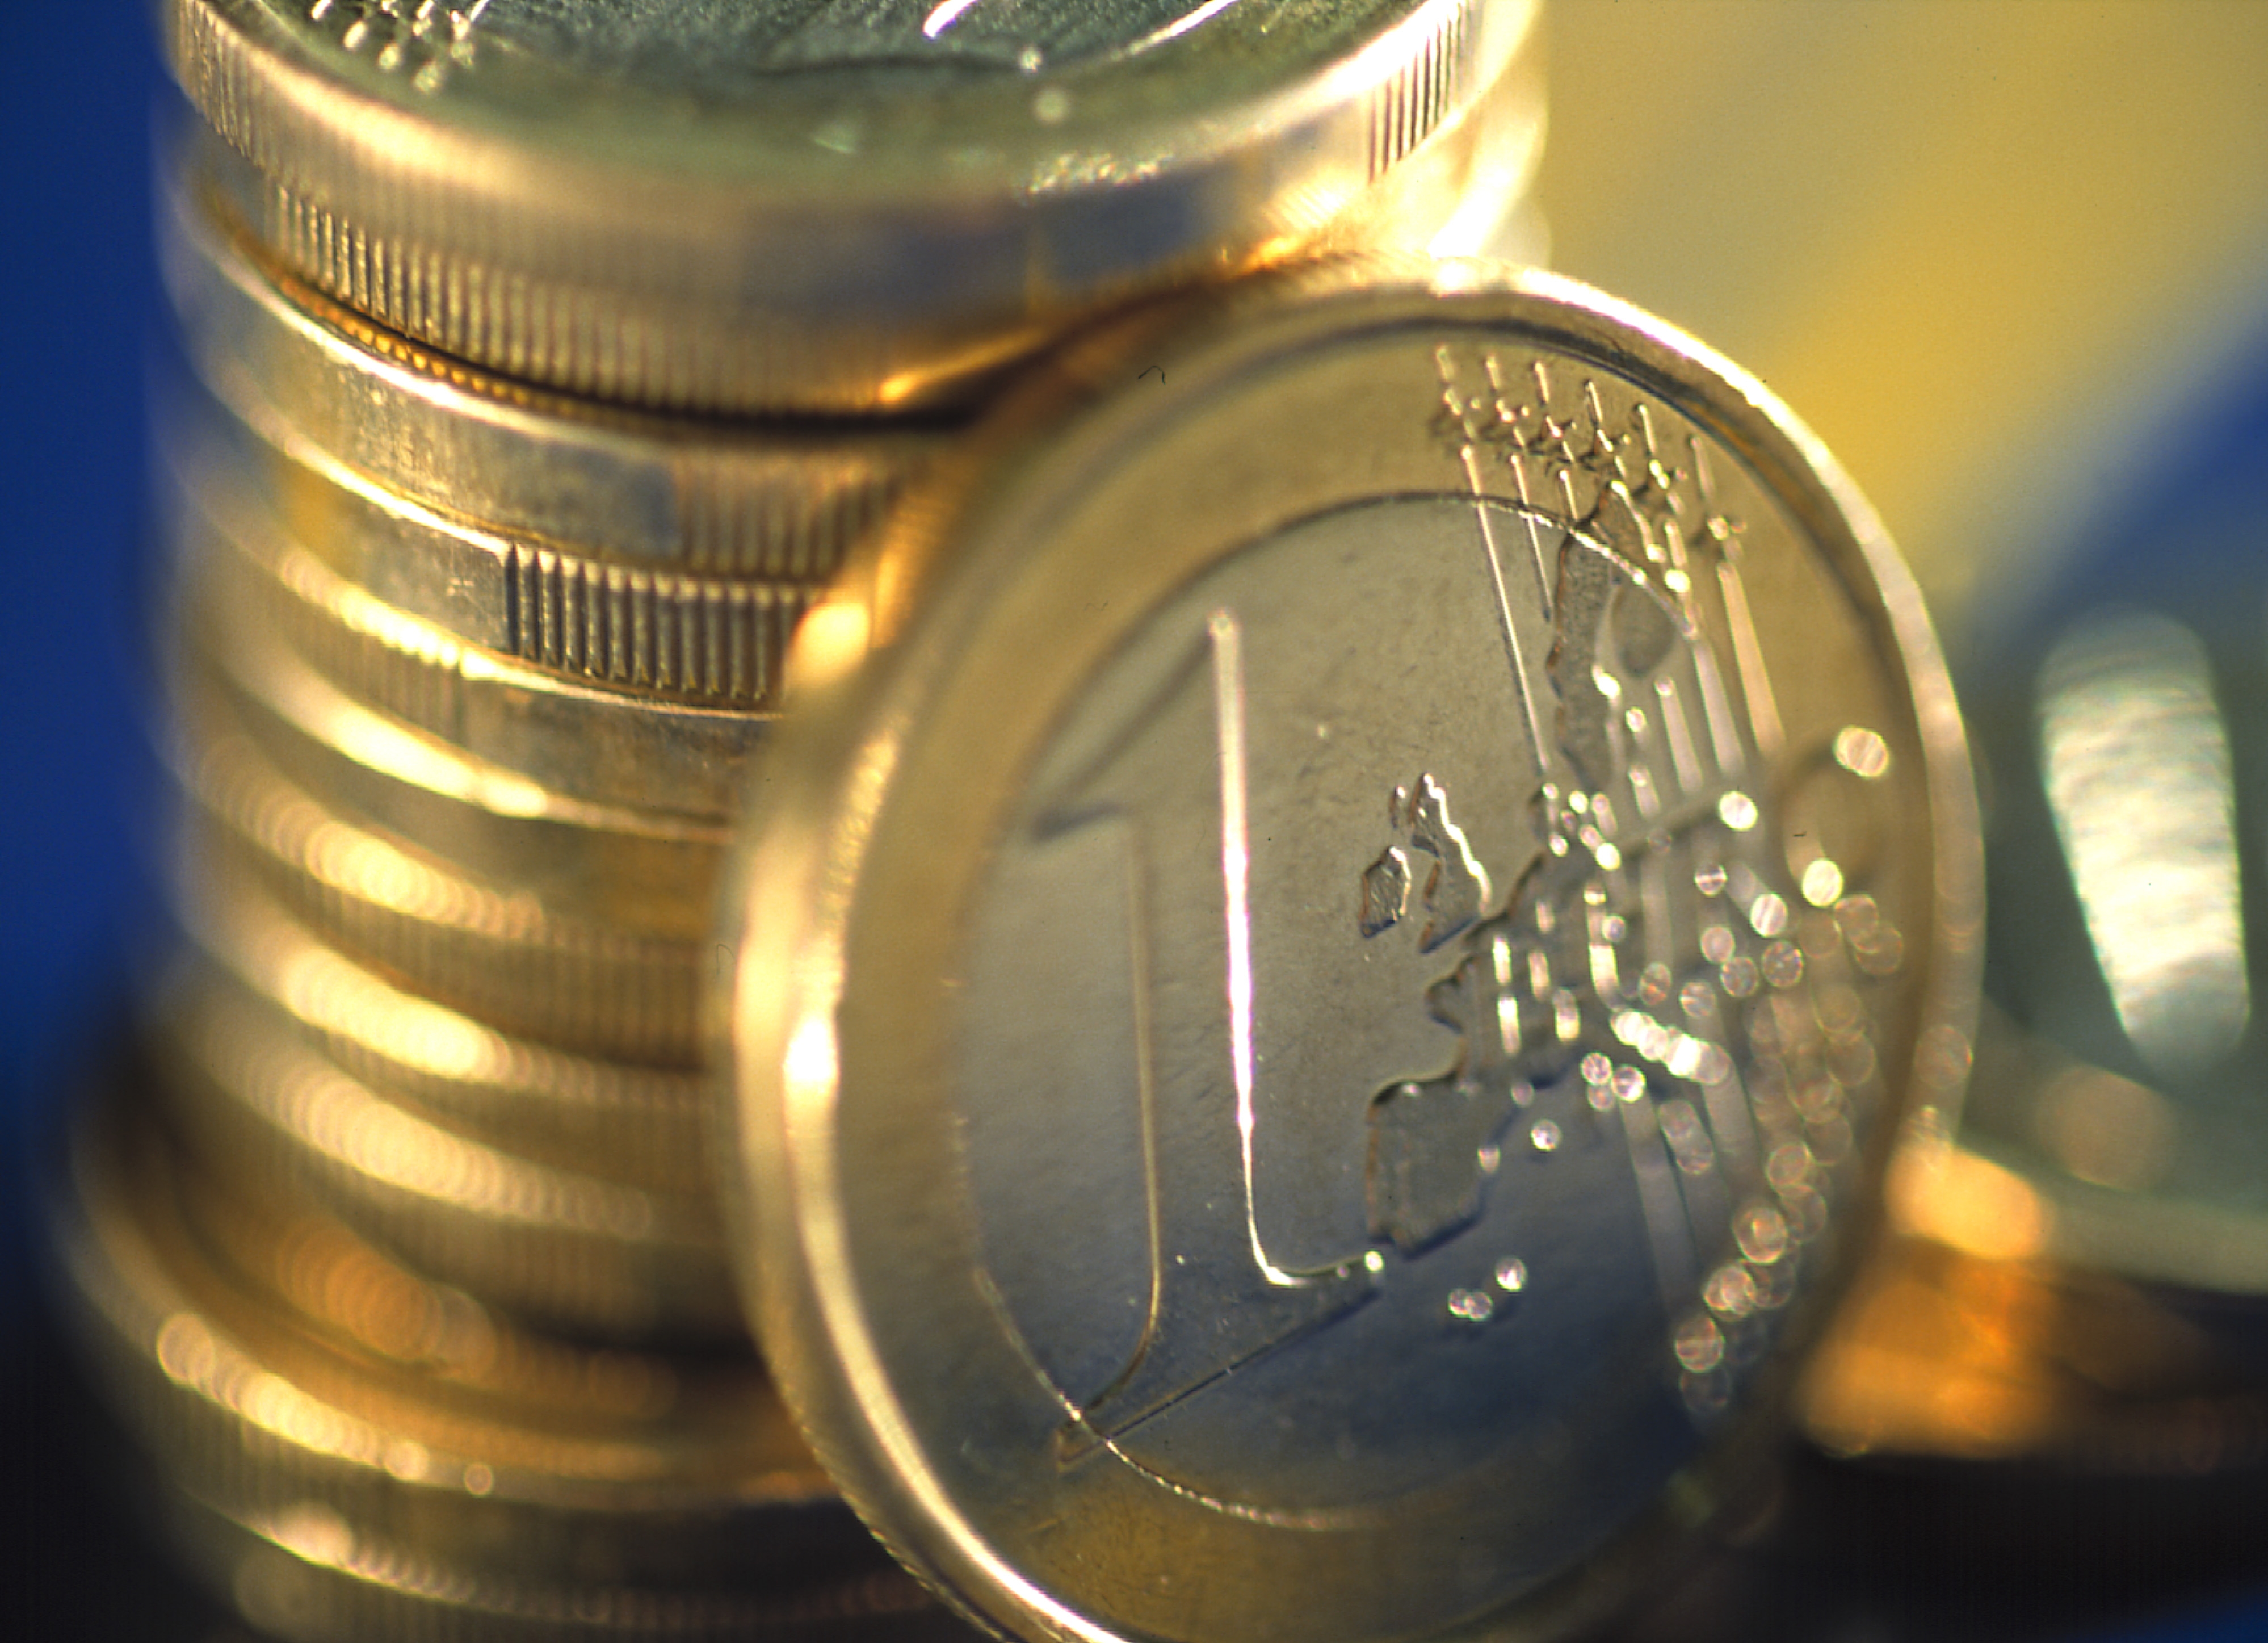 One euro coins (by ACN)